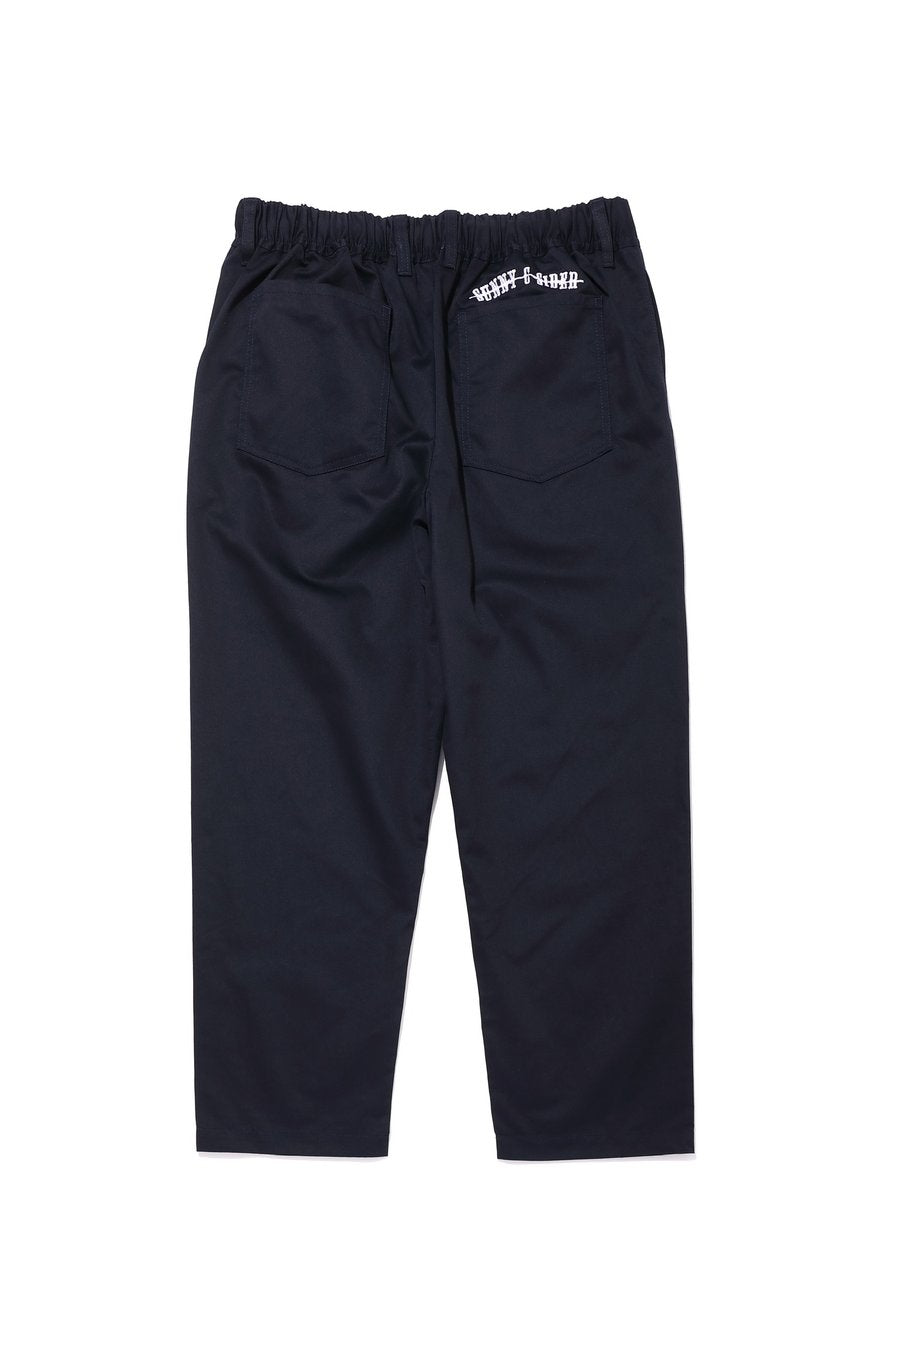 21SCS-WS-b.wire Pants / NVY